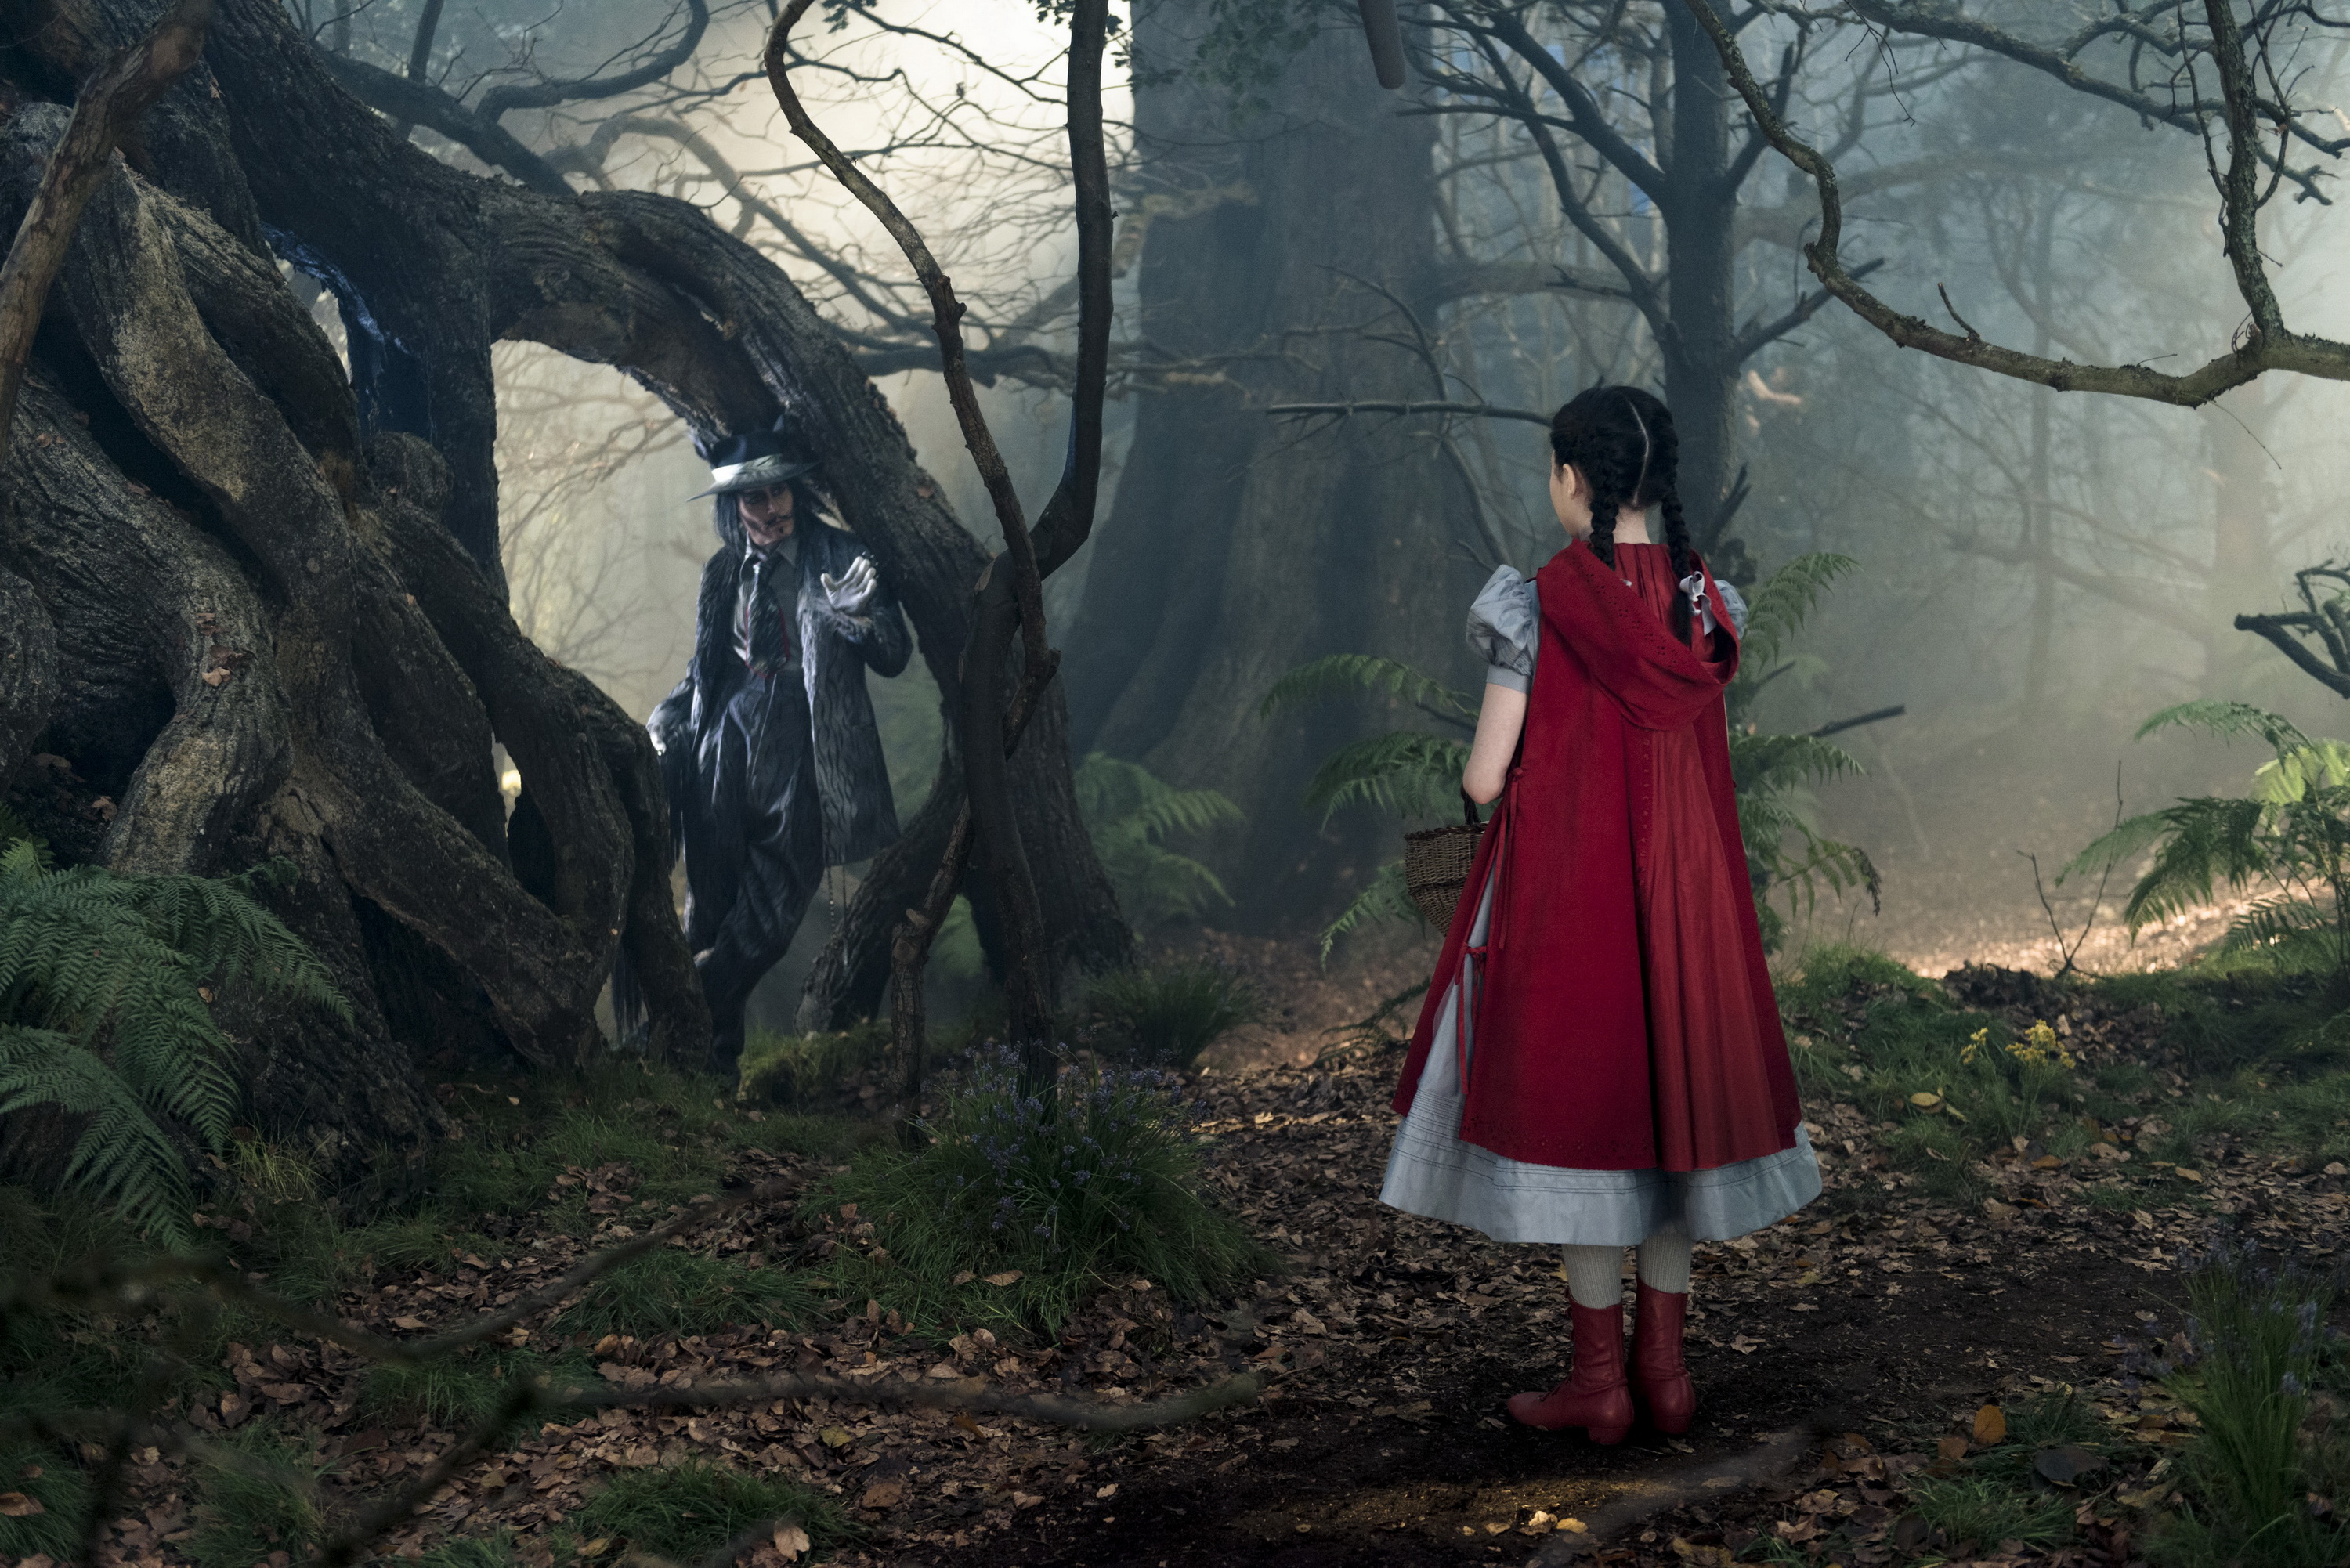 Johnny Depp as the Wolf and Lilla Crawford as Little Red Riding Hood in Disney's humorous and heartfelt musical INTO THE WOODS, directed by Rob Marshall and produced by John Deluca, Rob Marshall, Marc Platt and Callum McDougall.